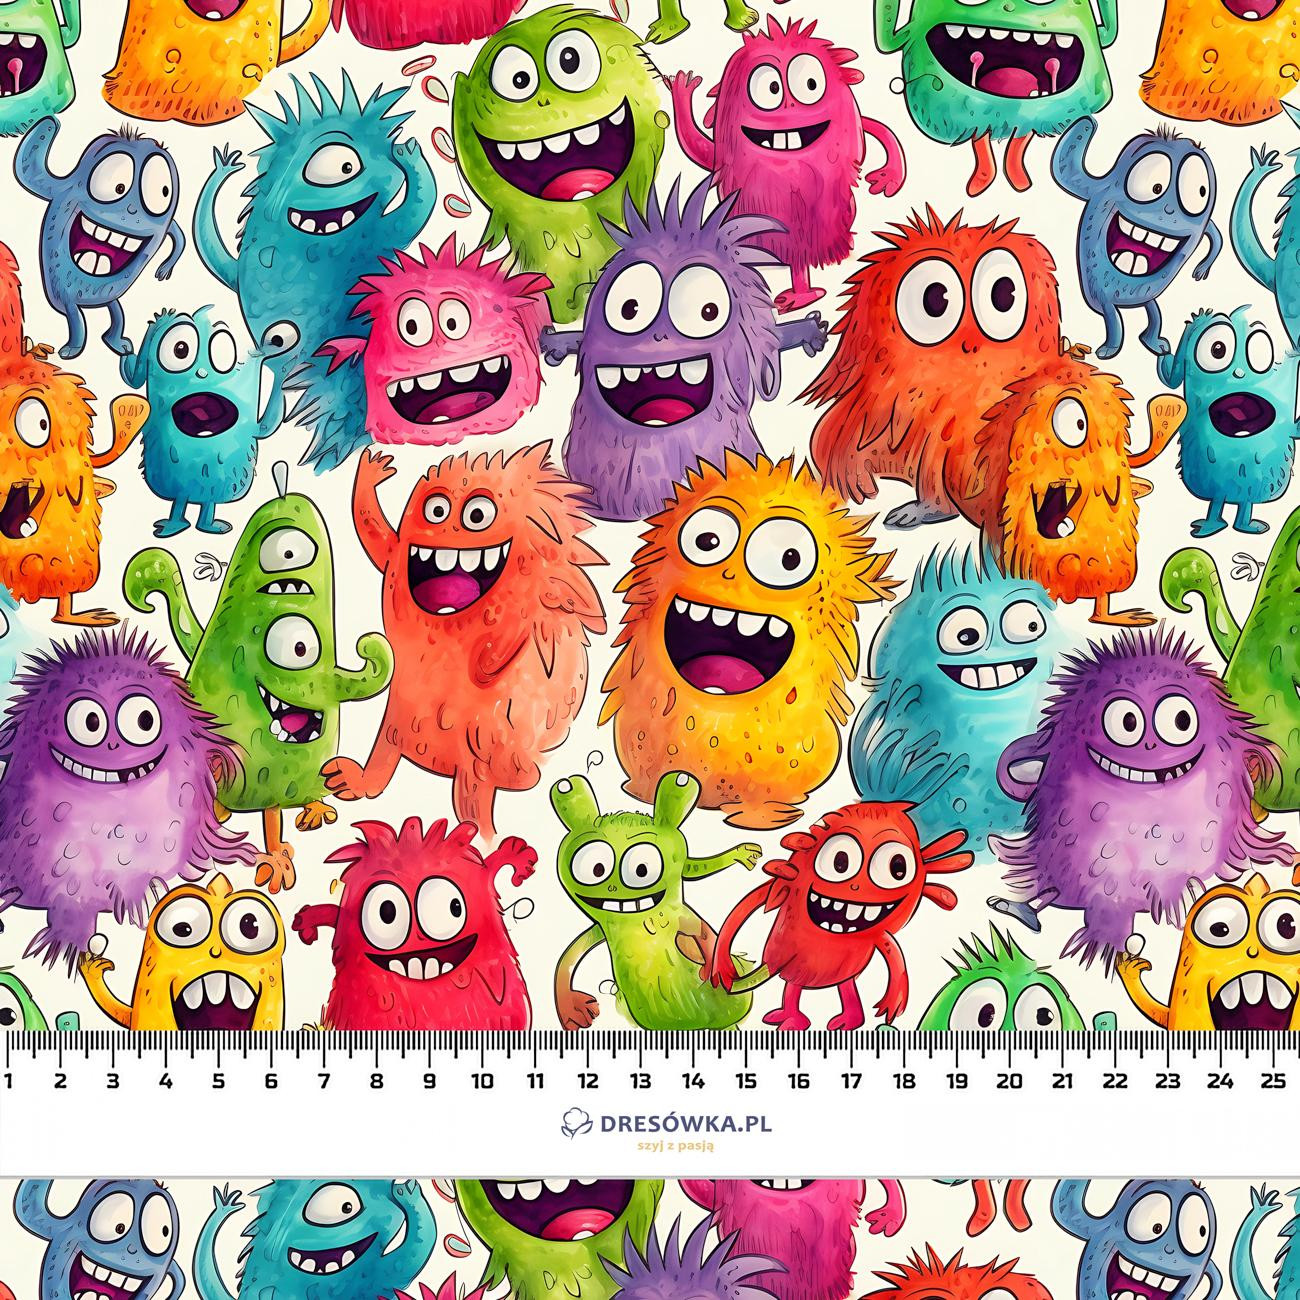 FUNNY MONSTERS PAT. 3 - Waterproof woven fabric